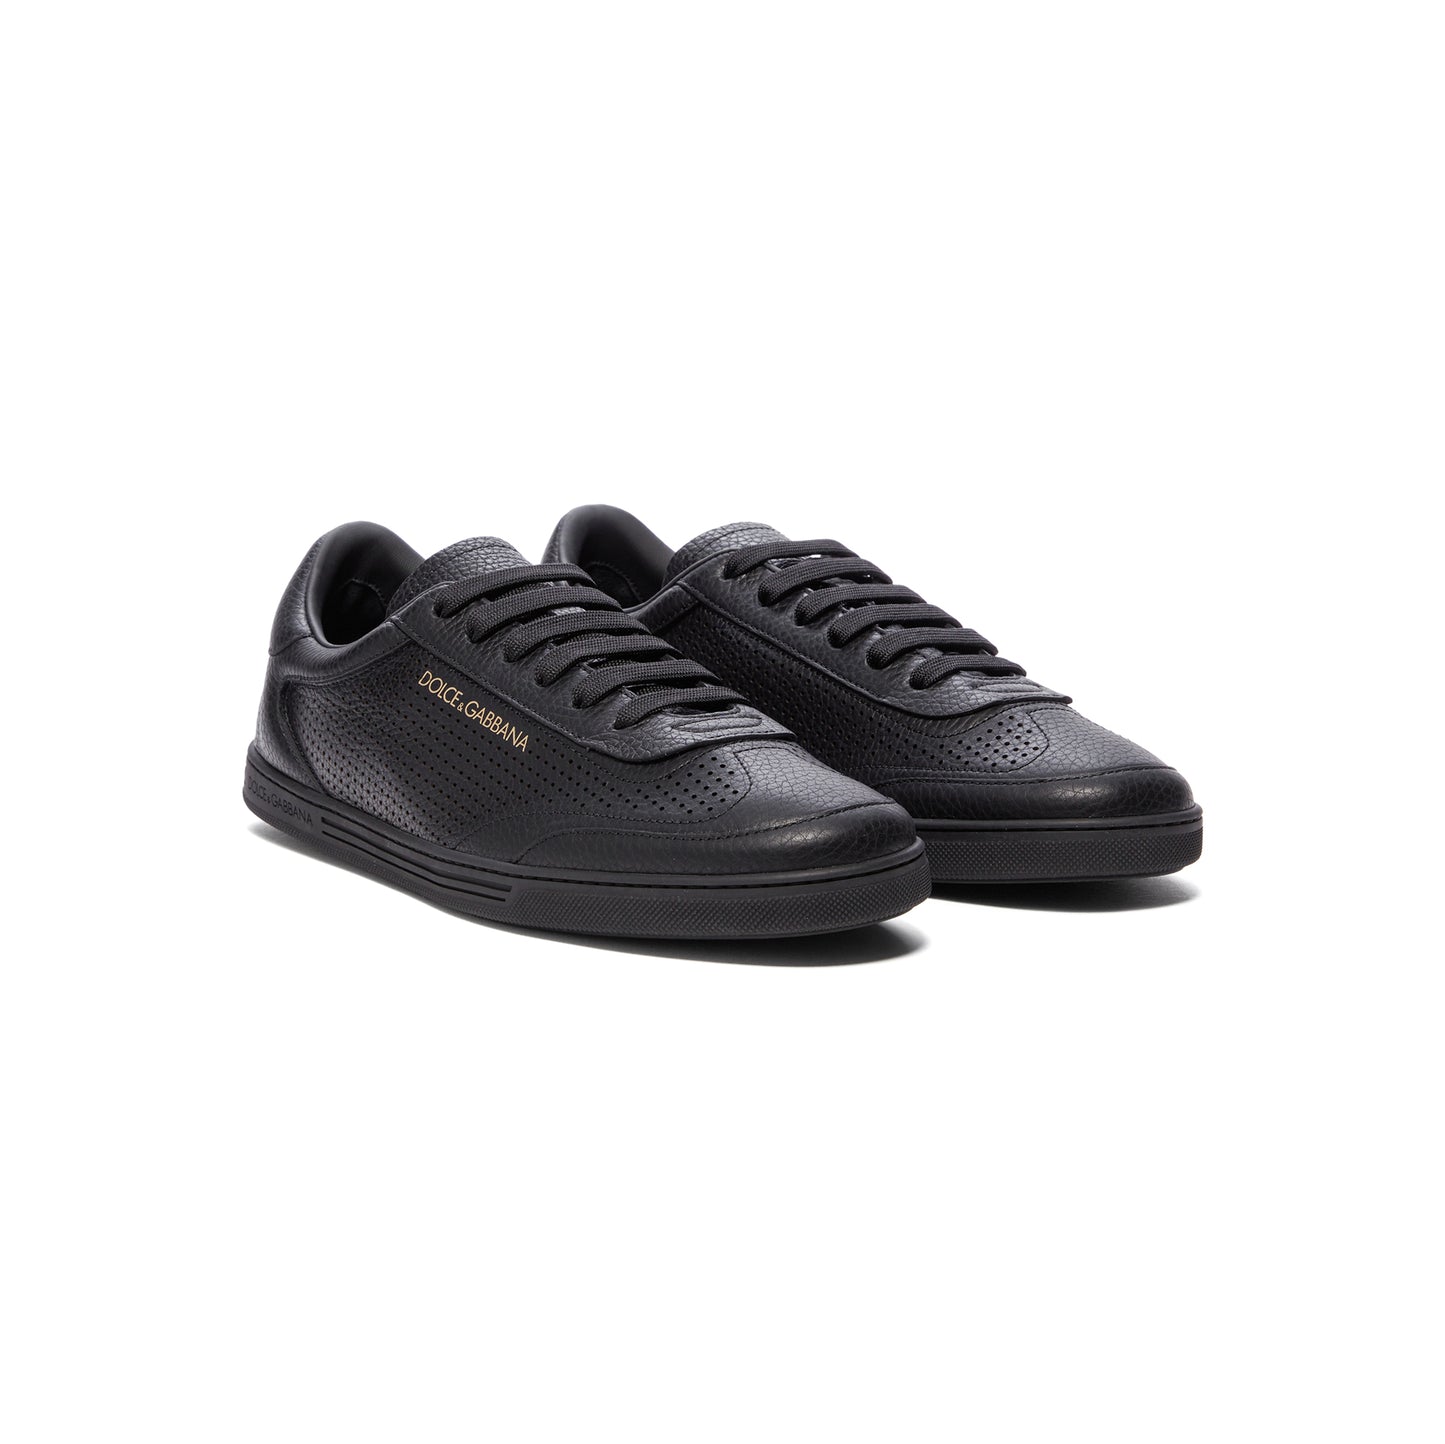 Dolce & Gabbana Perforated Low Top Sneakers (Black)